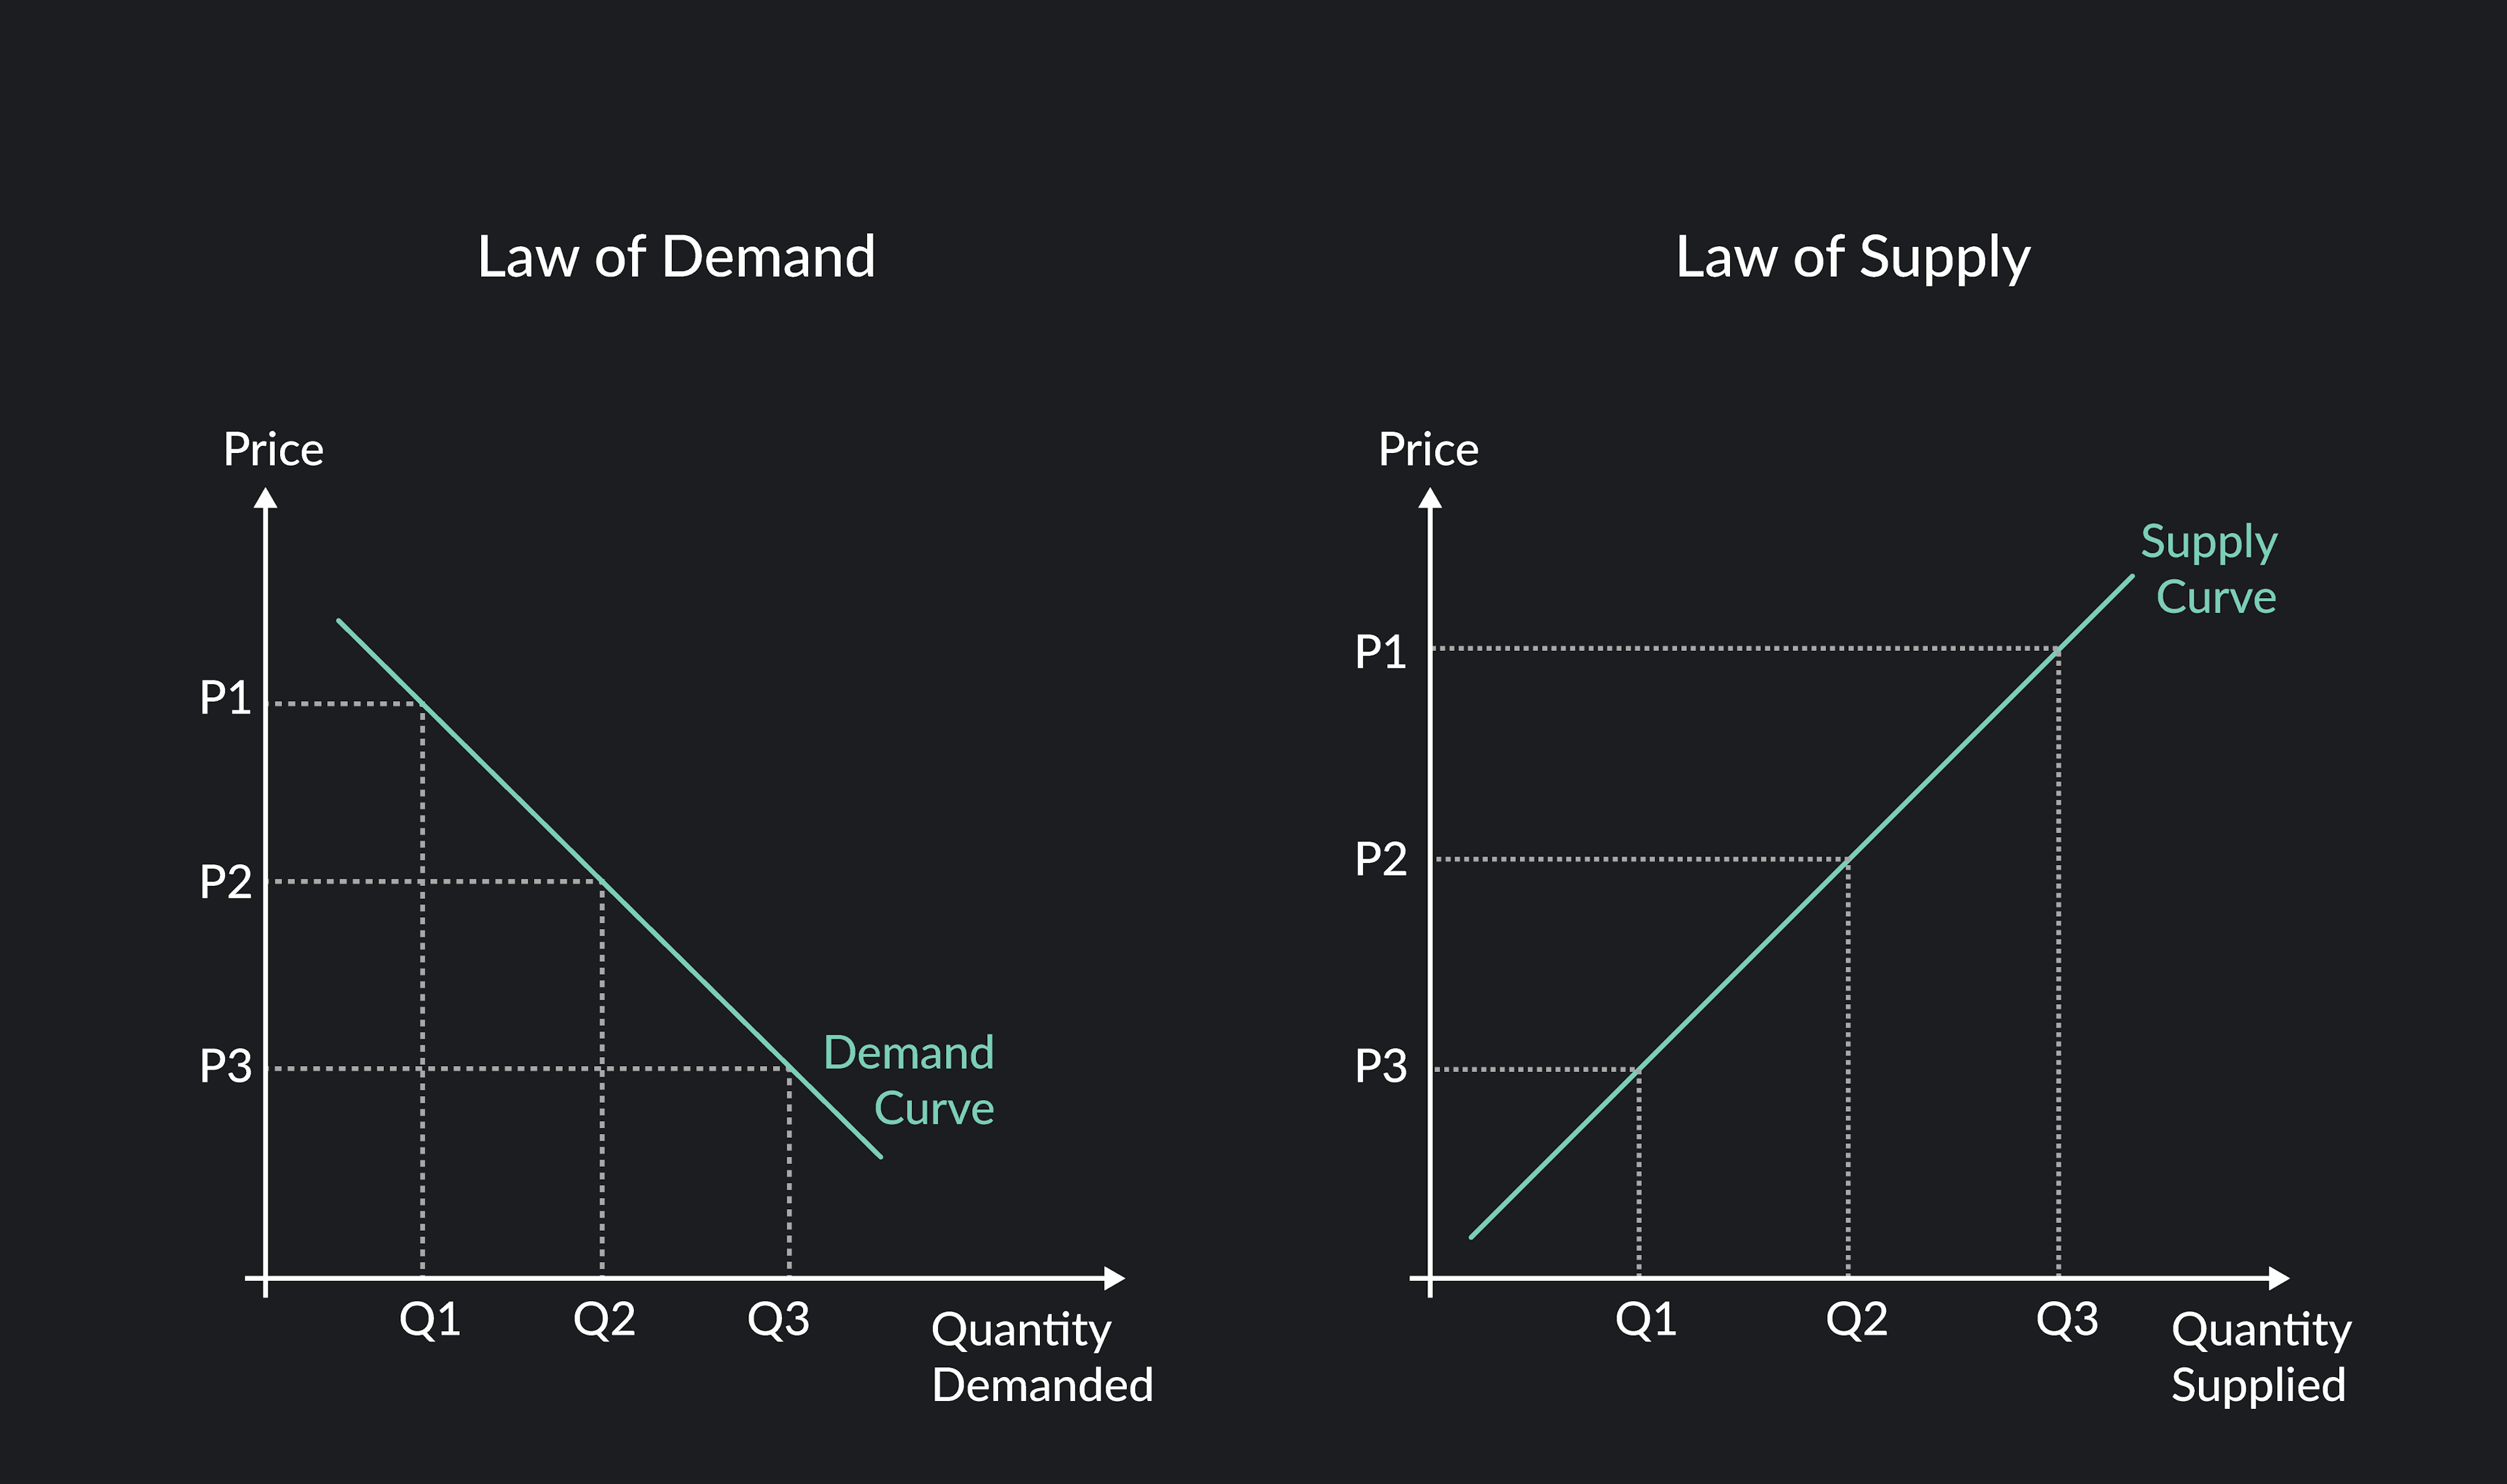 graphs of law of demand showing the demand curve and the law of supply showing the supply curve